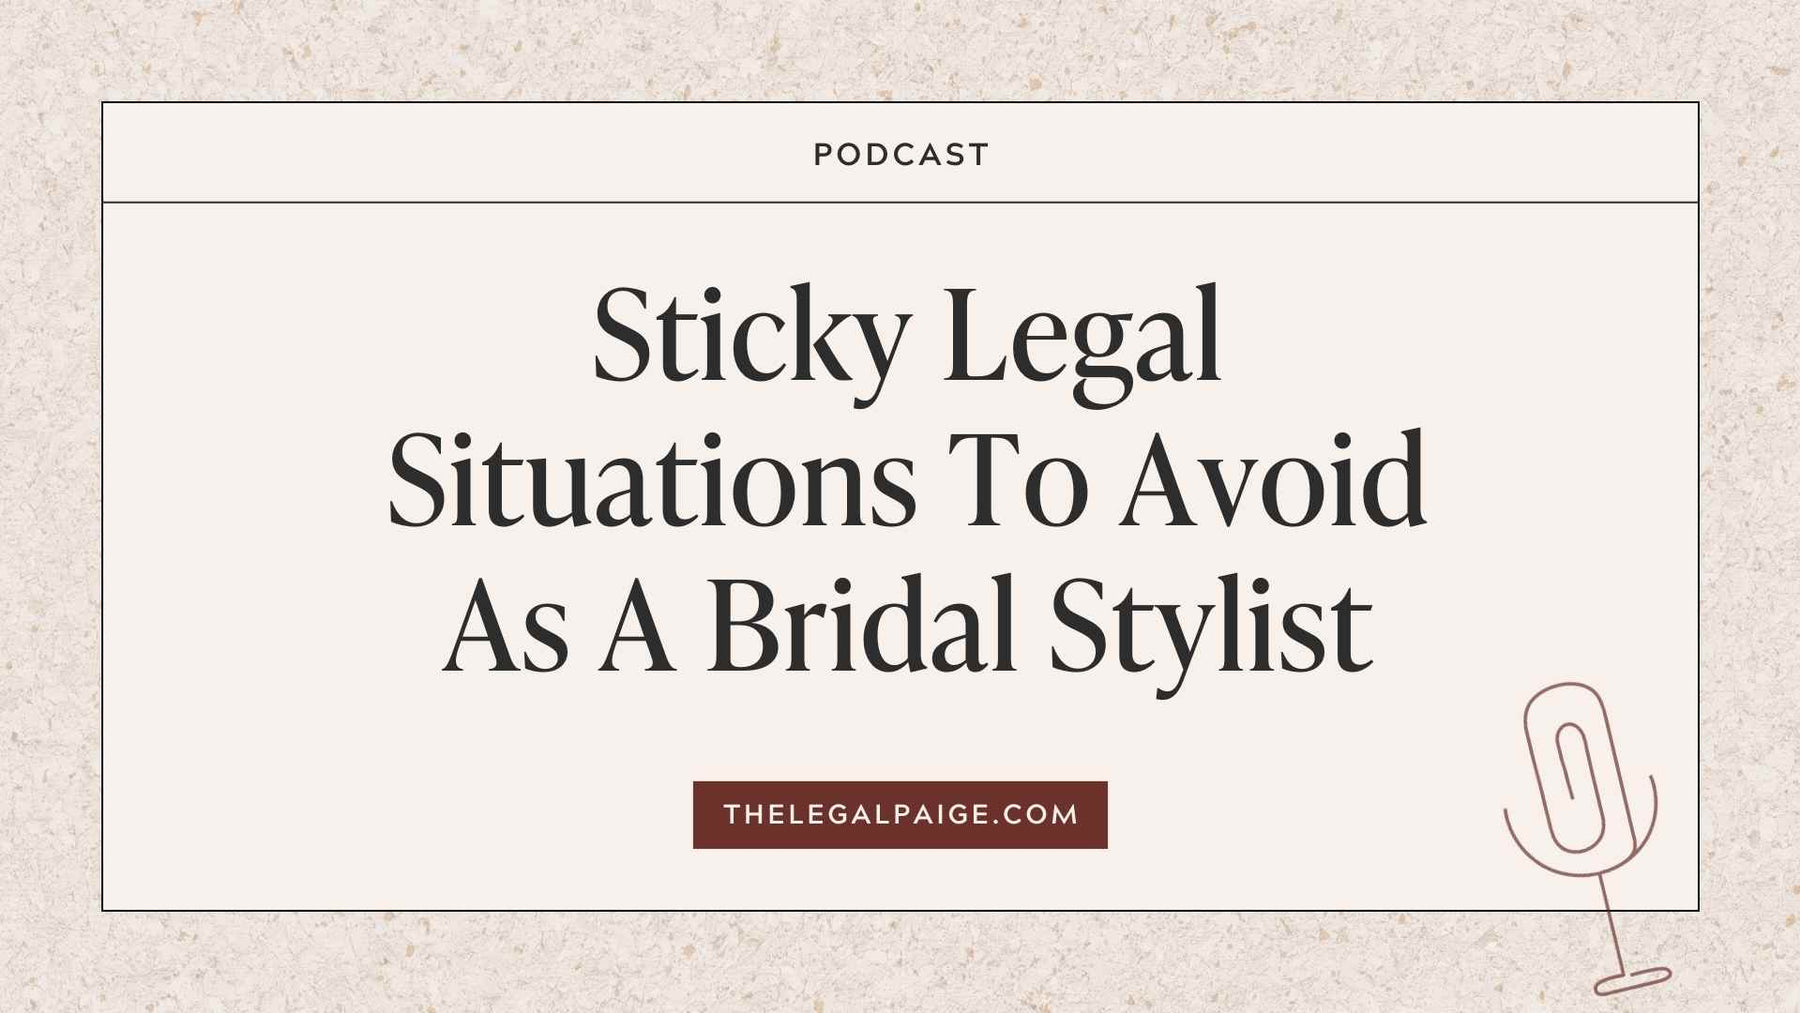 Episode 89: Sticky Legal Situations To Avoid As A Bridal Stylist